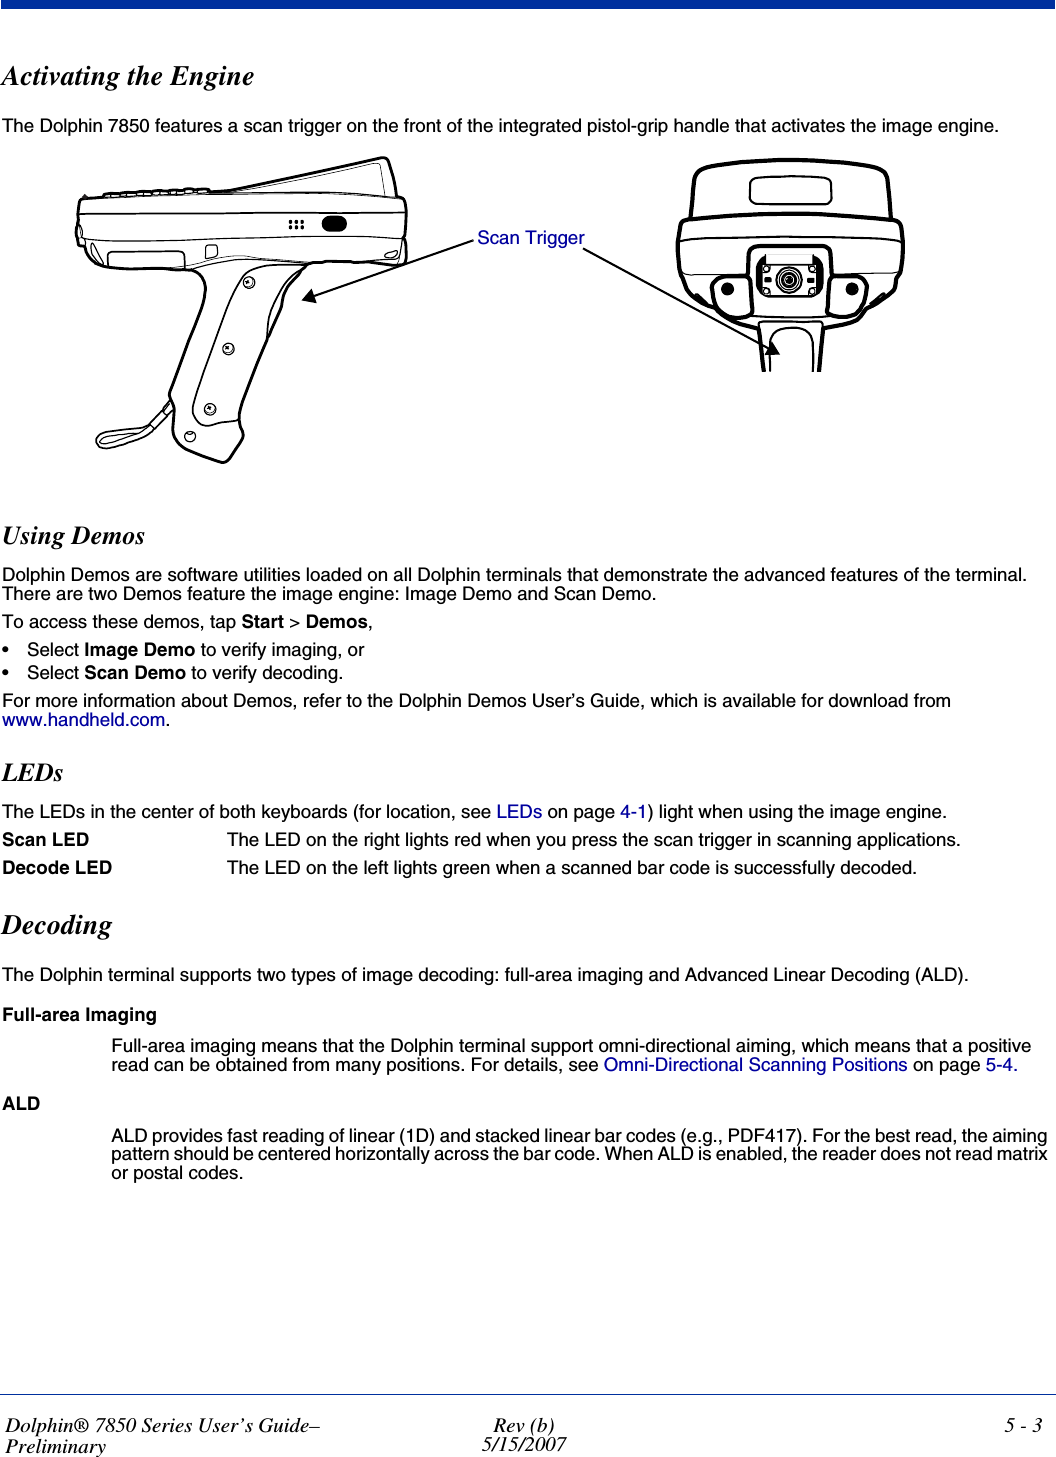 Dolphin® 7850 Series User’s Guide–PreliminaryRev (b)5/15/20075 - 3Activating the EngineThe Dolphin 7850 features a scan trigger on the front of the integrated pistol-grip handle that activates the image engine.Using DemosDolphin Demos are software utilities loaded on all Dolphin terminals that demonstrate the advanced features of the terminal. There are two Demos feature the image engine: Image Demo and Scan Demo.To access these demos, tap Start &gt; Demos,•Select Image Demo to verify imaging, or•Select Scan Demo to verify decoding.For more information about Demos, refer to the Dolphin Demos User’s Guide, which is available for download from www.handheld.com.LEDsThe LEDs in the center of both keyboards (for location, see LEDs on page 4-1) light when using the image engine.Scan LED  The LED on the right lights red when you press the scan trigger in scanning applications.Decode LED  The LED on the left lights green when a scanned bar code is successfully decoded.DecodingThe Dolphin terminal supports two types of image decoding: full-area imaging and Advanced Linear Decoding (ALD).Full-area ImagingFull-area imaging means that the Dolphin terminal support omni-directional aiming, which means that a positive read can be obtained from many positions. For details, see Omni-Directional Scanning Positions on page 5-4. ALDALD provides fast reading of linear (1D) and stacked linear bar codes (e.g., PDF417). For the best read, the aiming pattern should be centered horizontally across the bar code. When ALD is enabled, the reader does not read matrix or postal codes.Scan Trigger